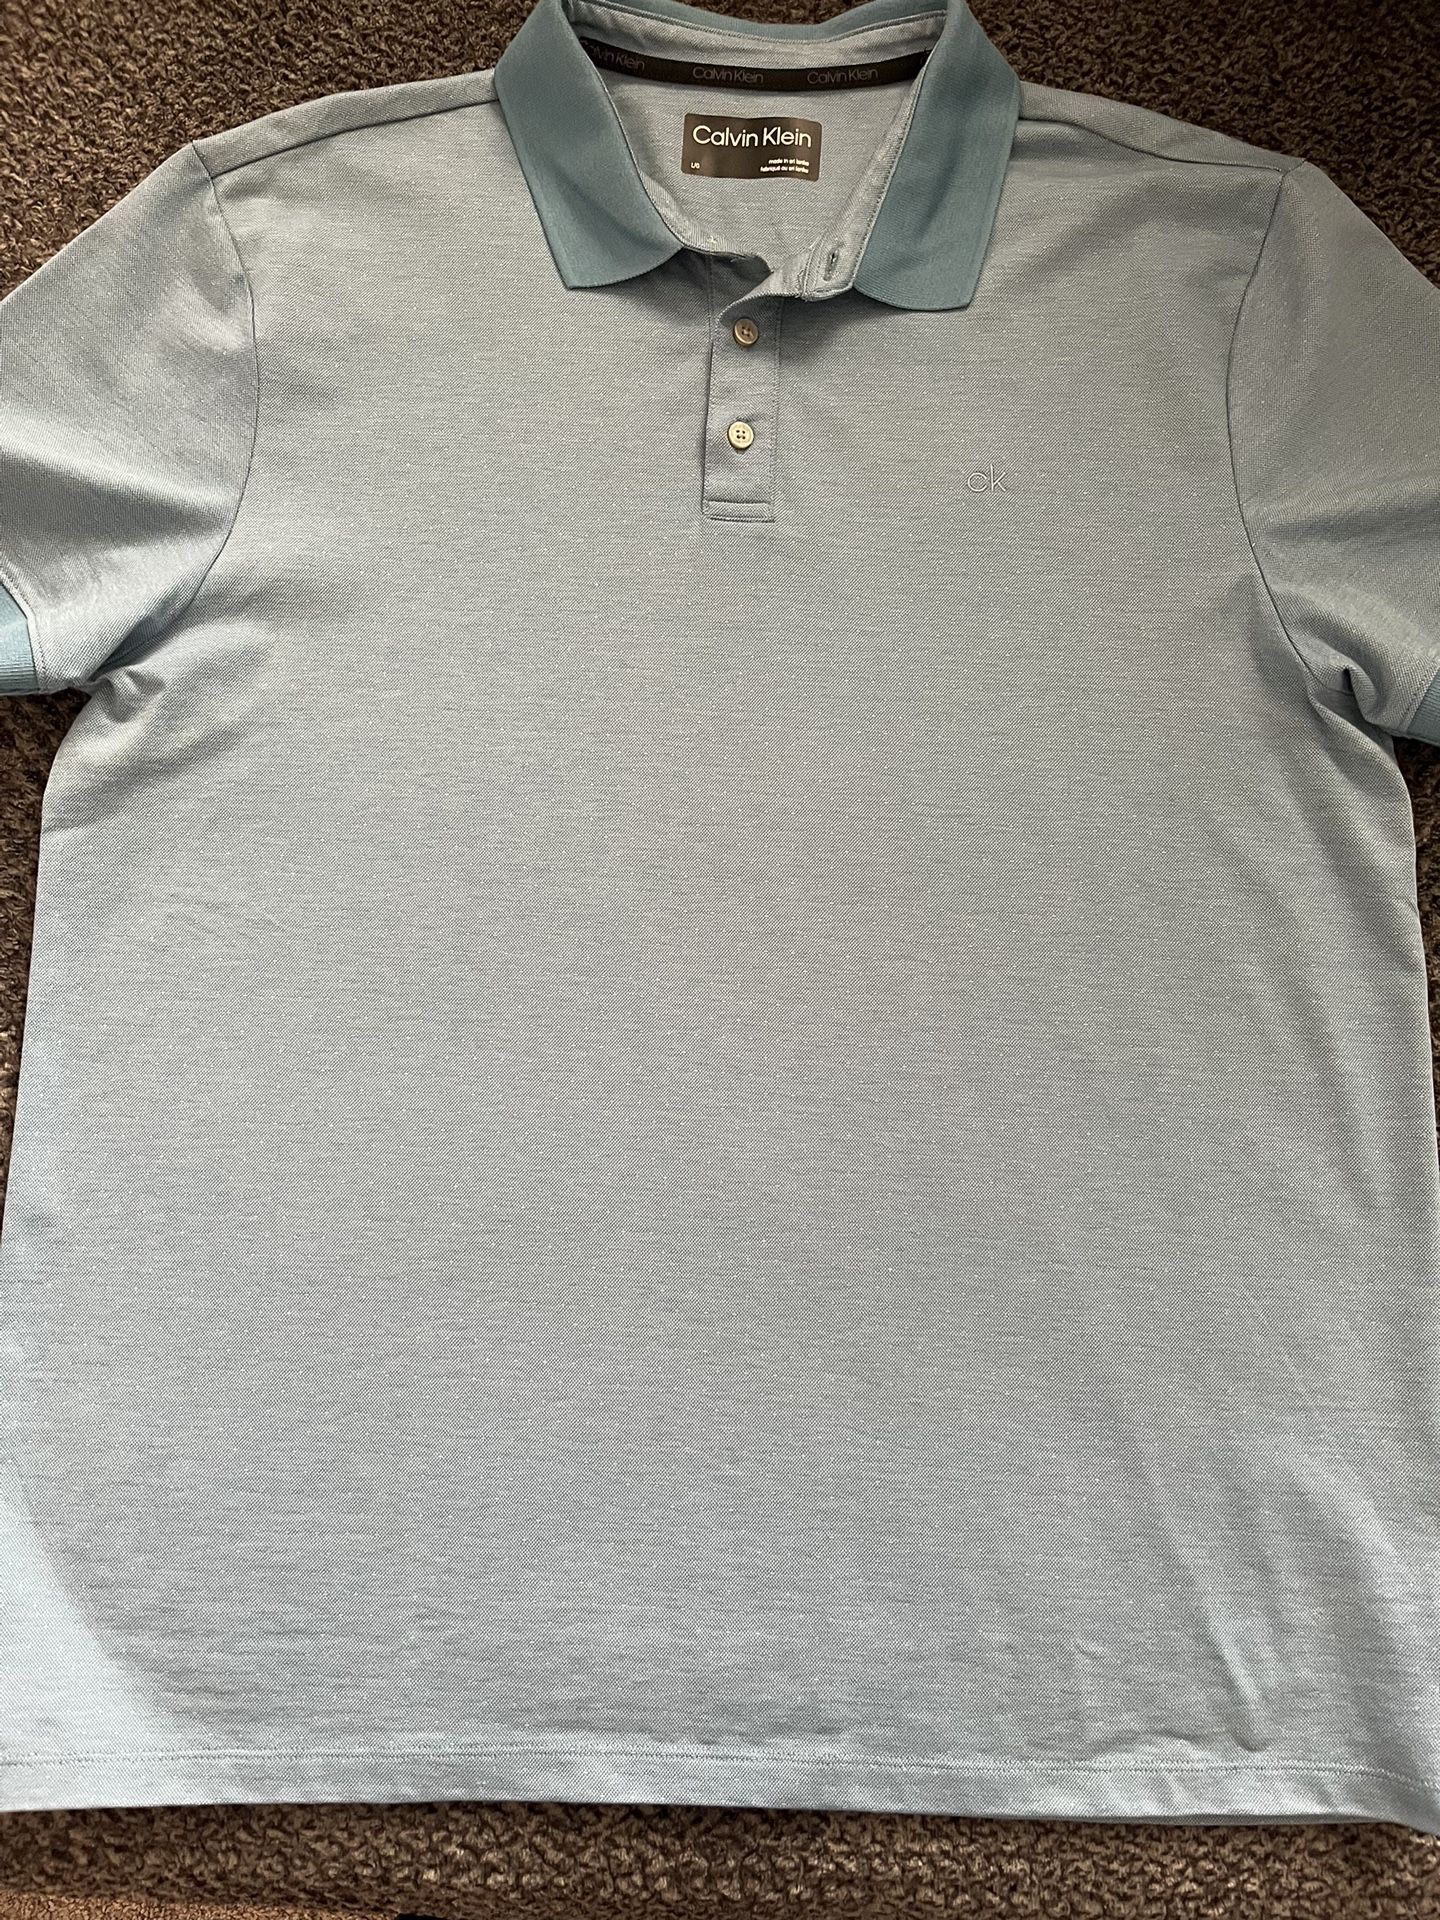 Mens Large CK Baby Blue Polo 